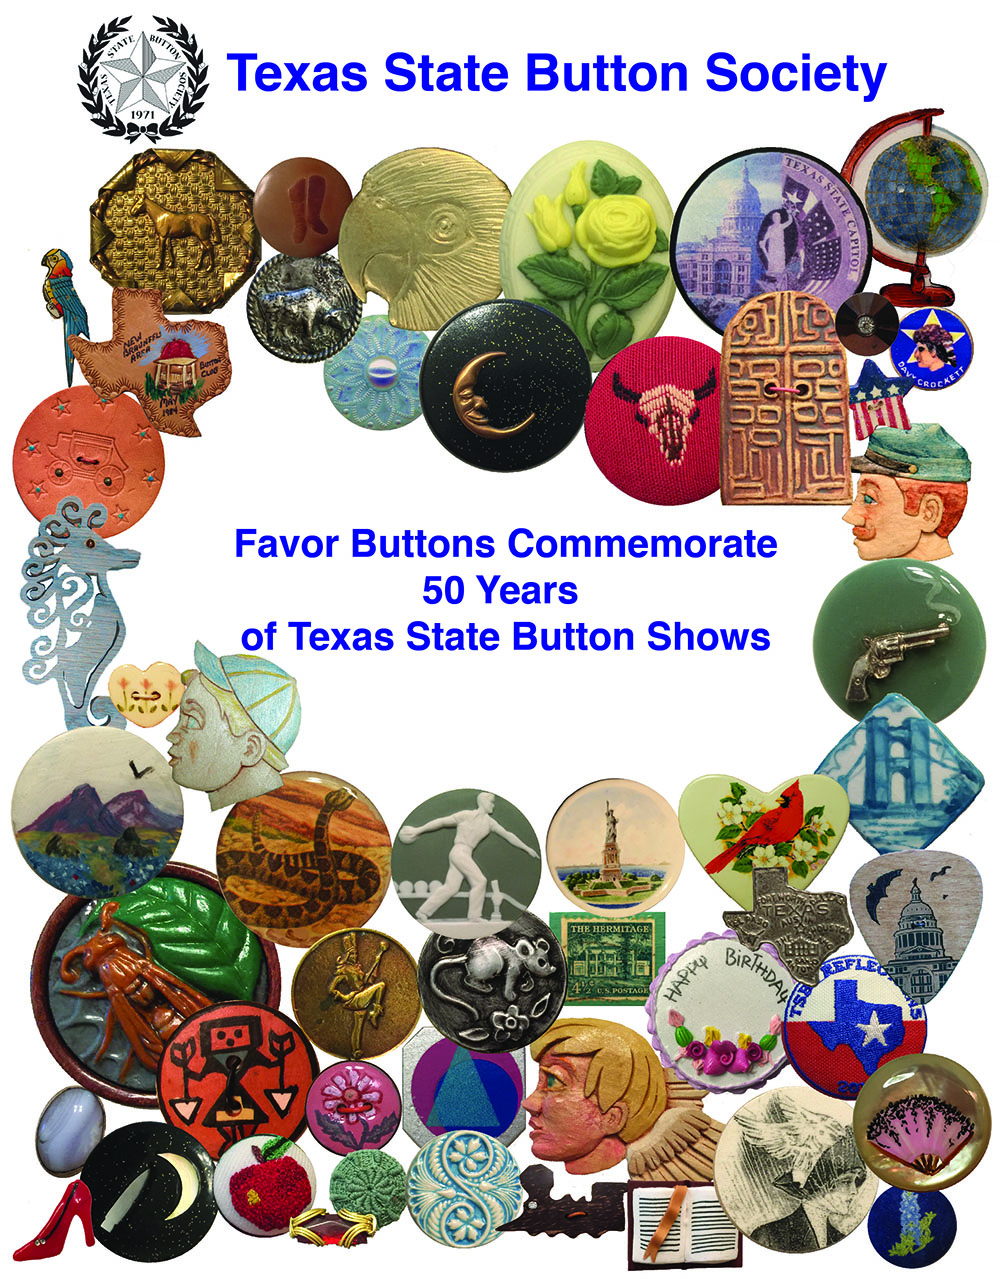 Favor Buttons Commemorate 50 Years of Texas State Button Shows